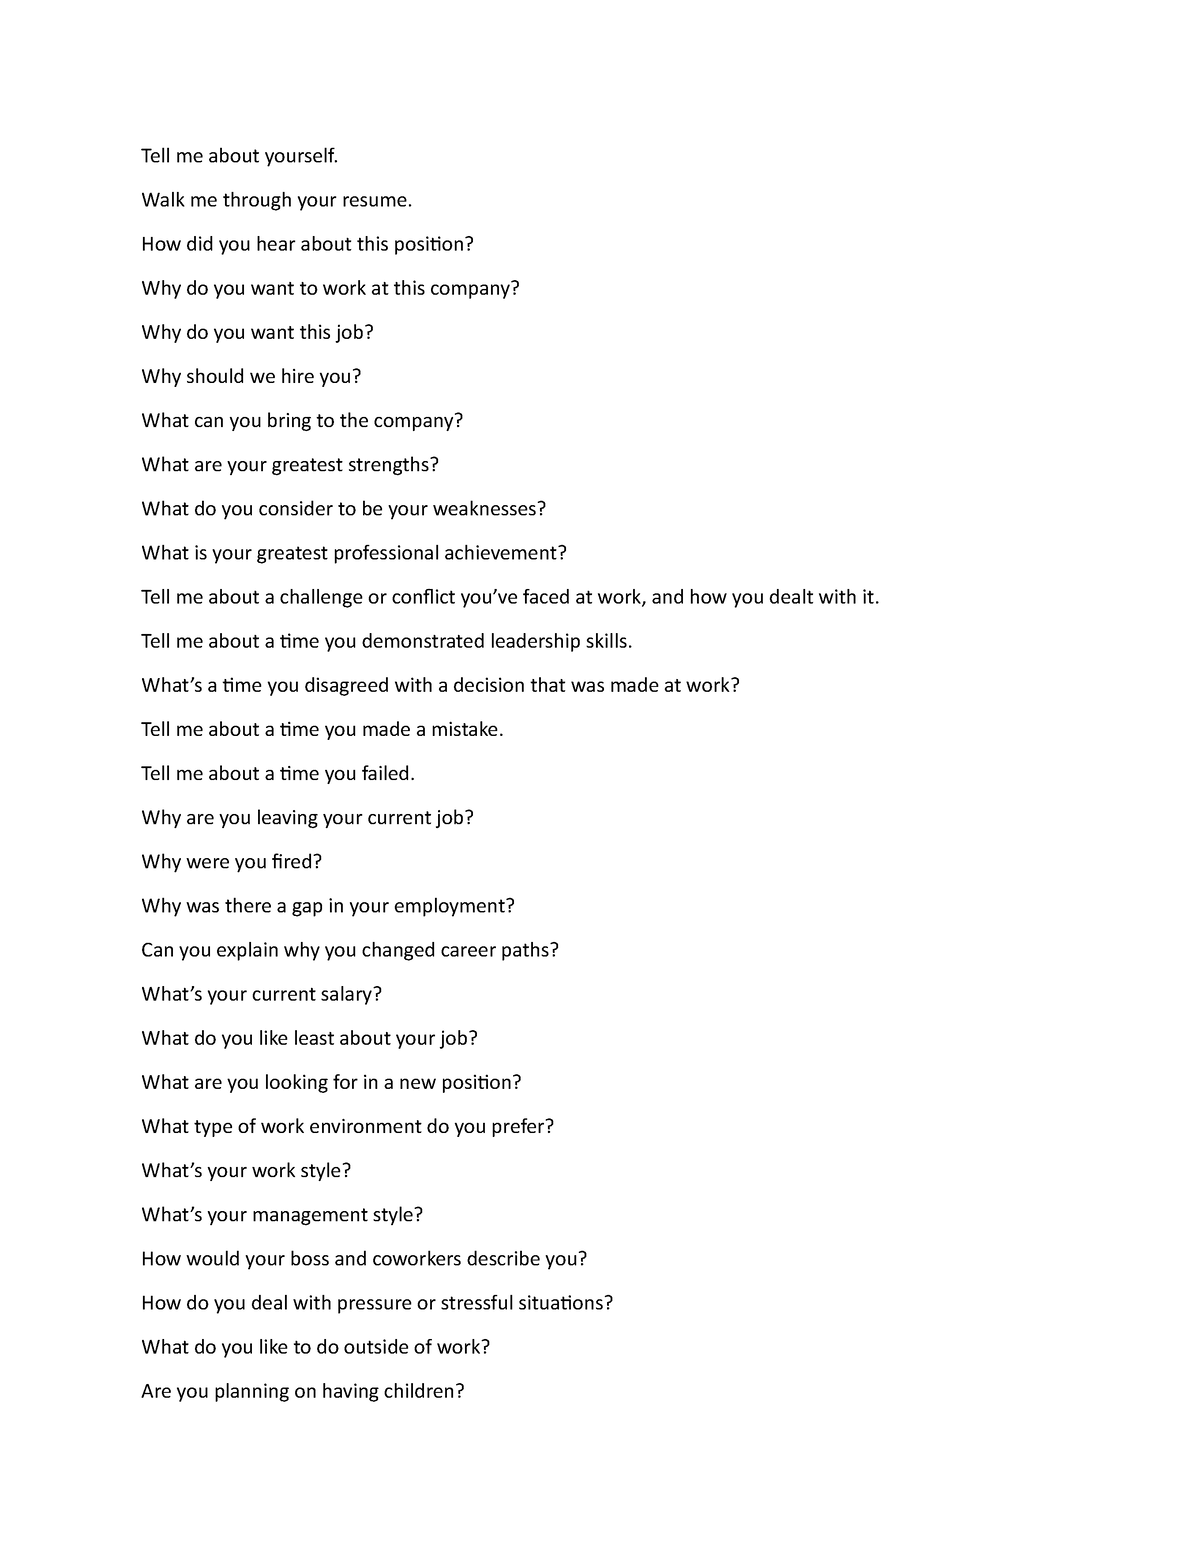 Sample- Interview- Questions - Tell me about yourself. Walk me through ...